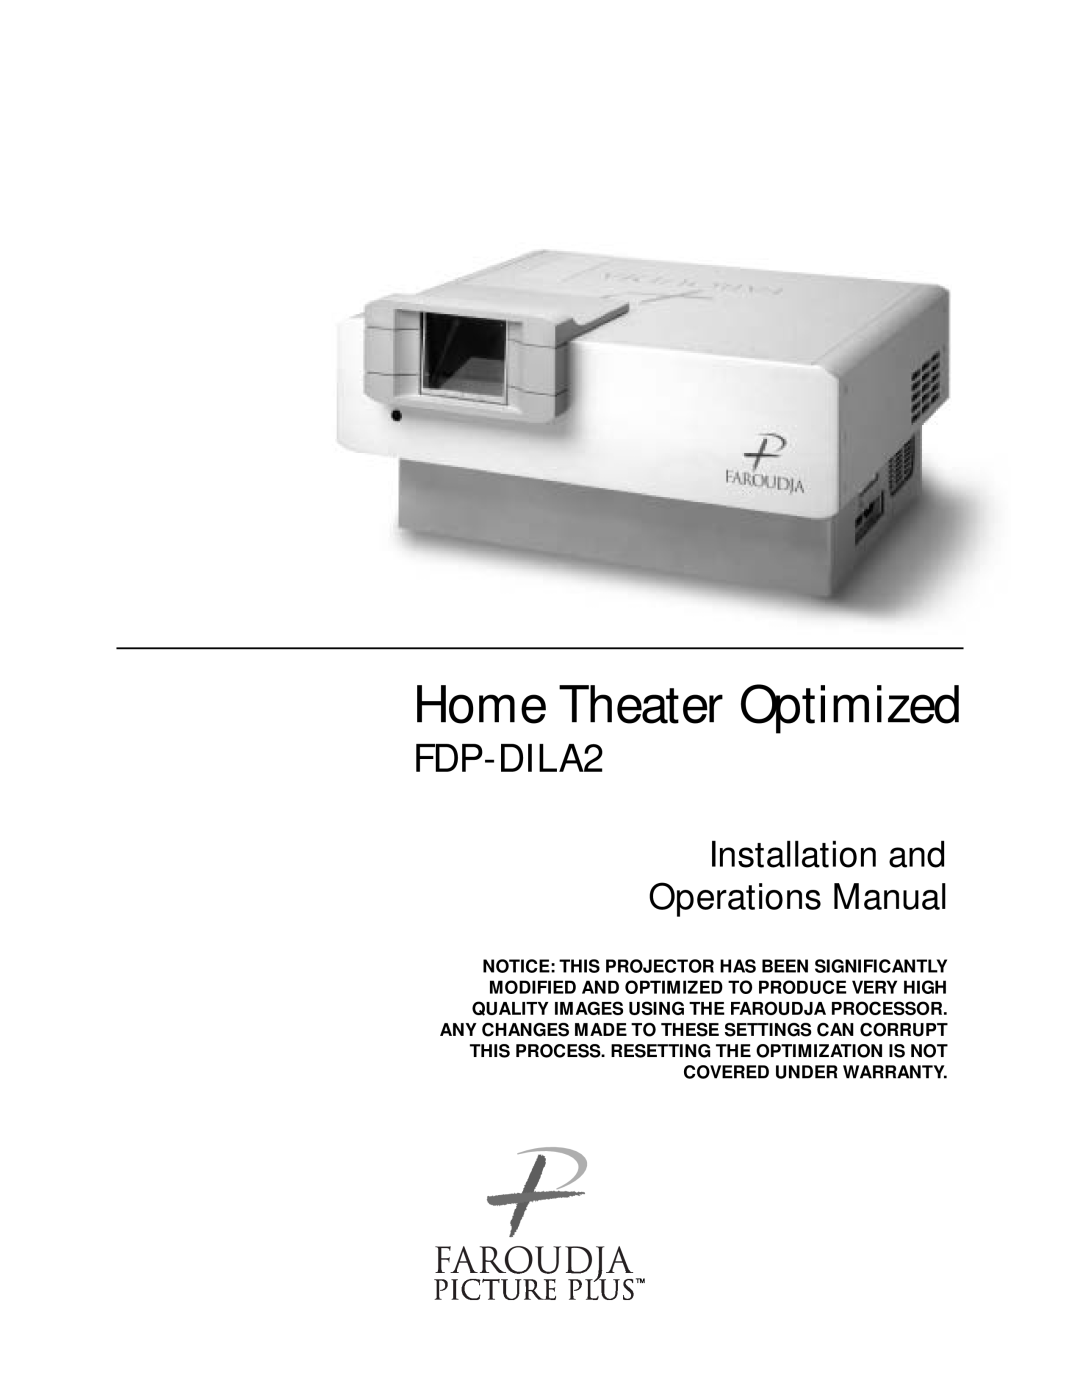 Meridian Audio FDP-DILA2 warranty Home Theater Optimized, Installation and Operations Manual 